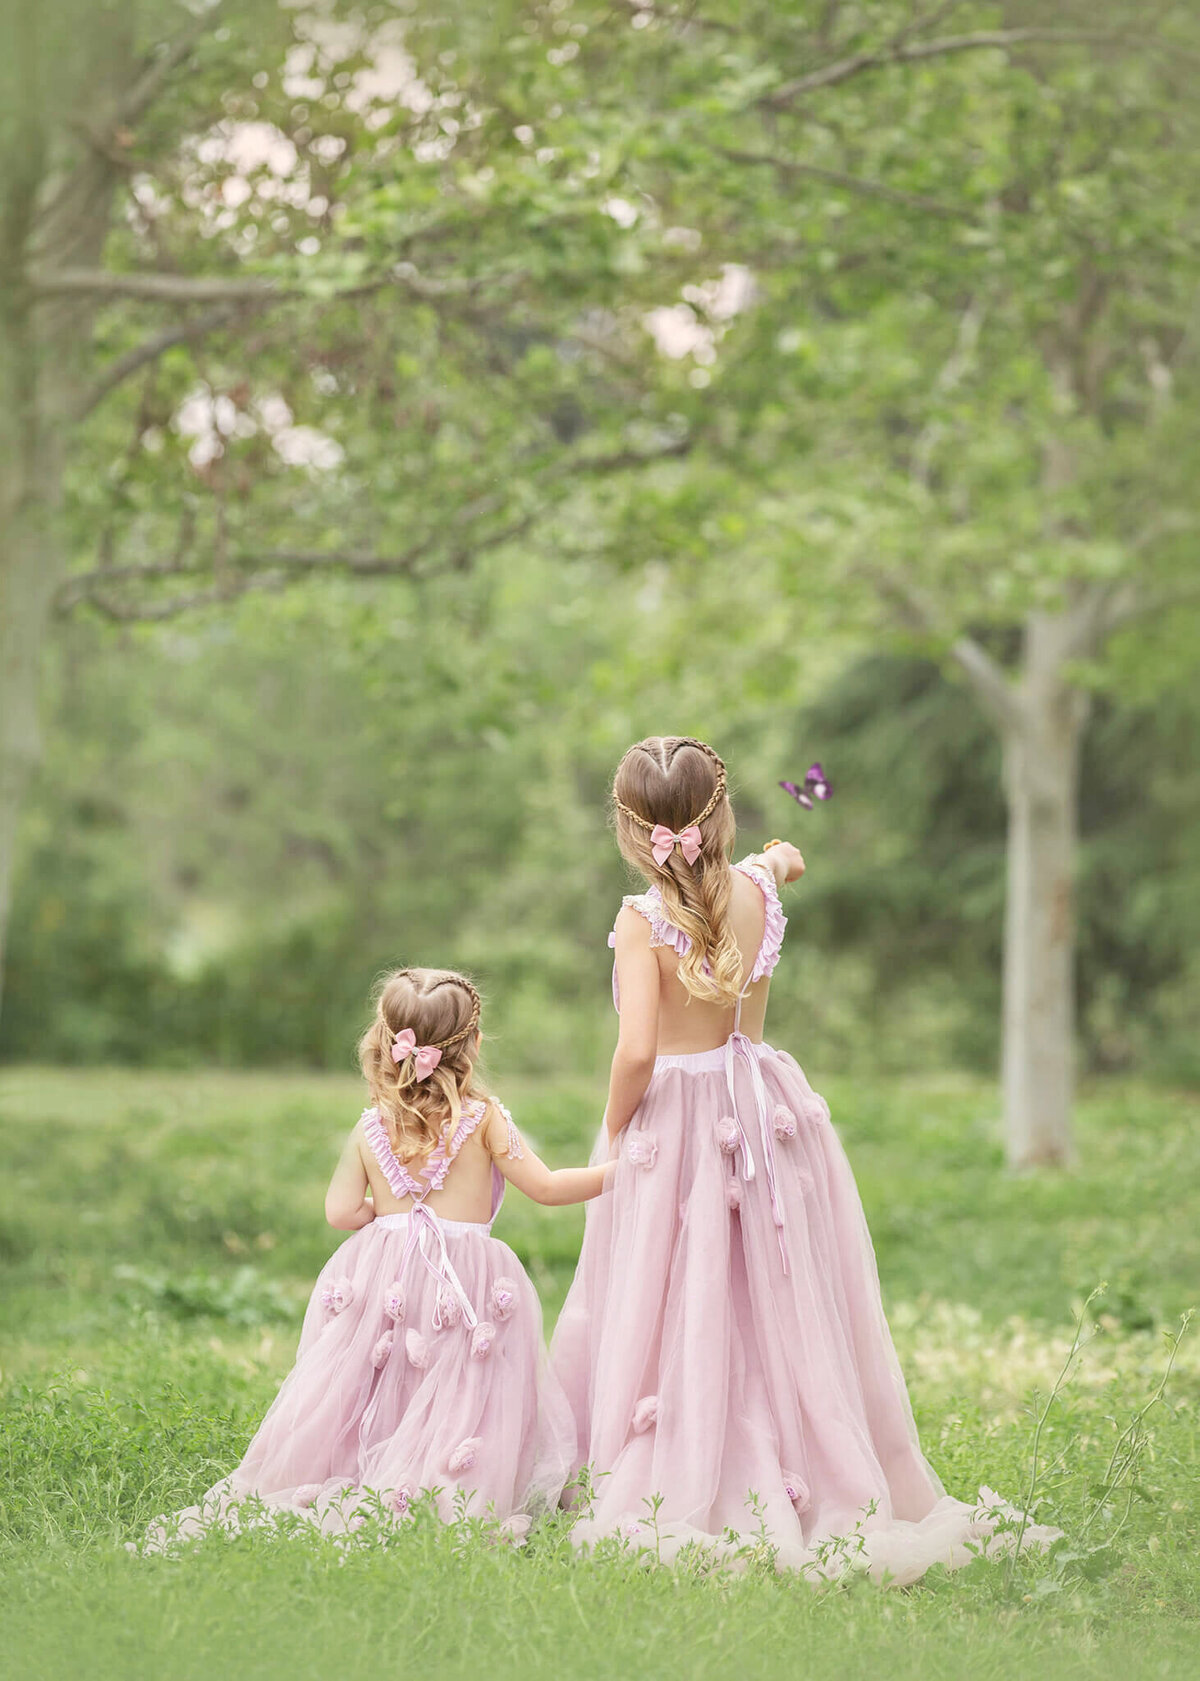 Sisters holding hands and facing away from camera in the green grass at Spring time